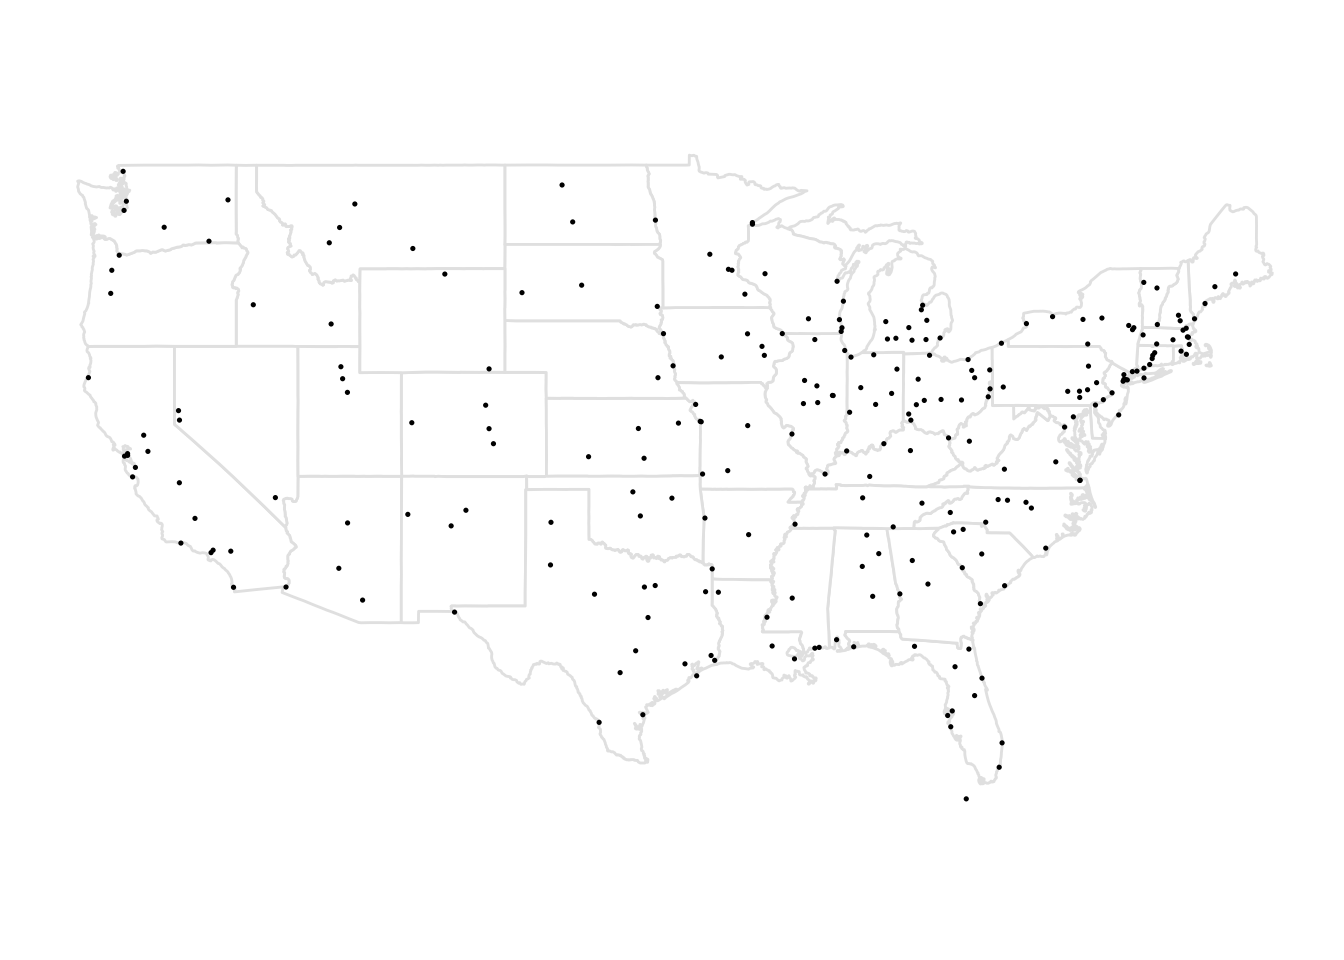 The 257 cities that must be visited in the Salesman problem.